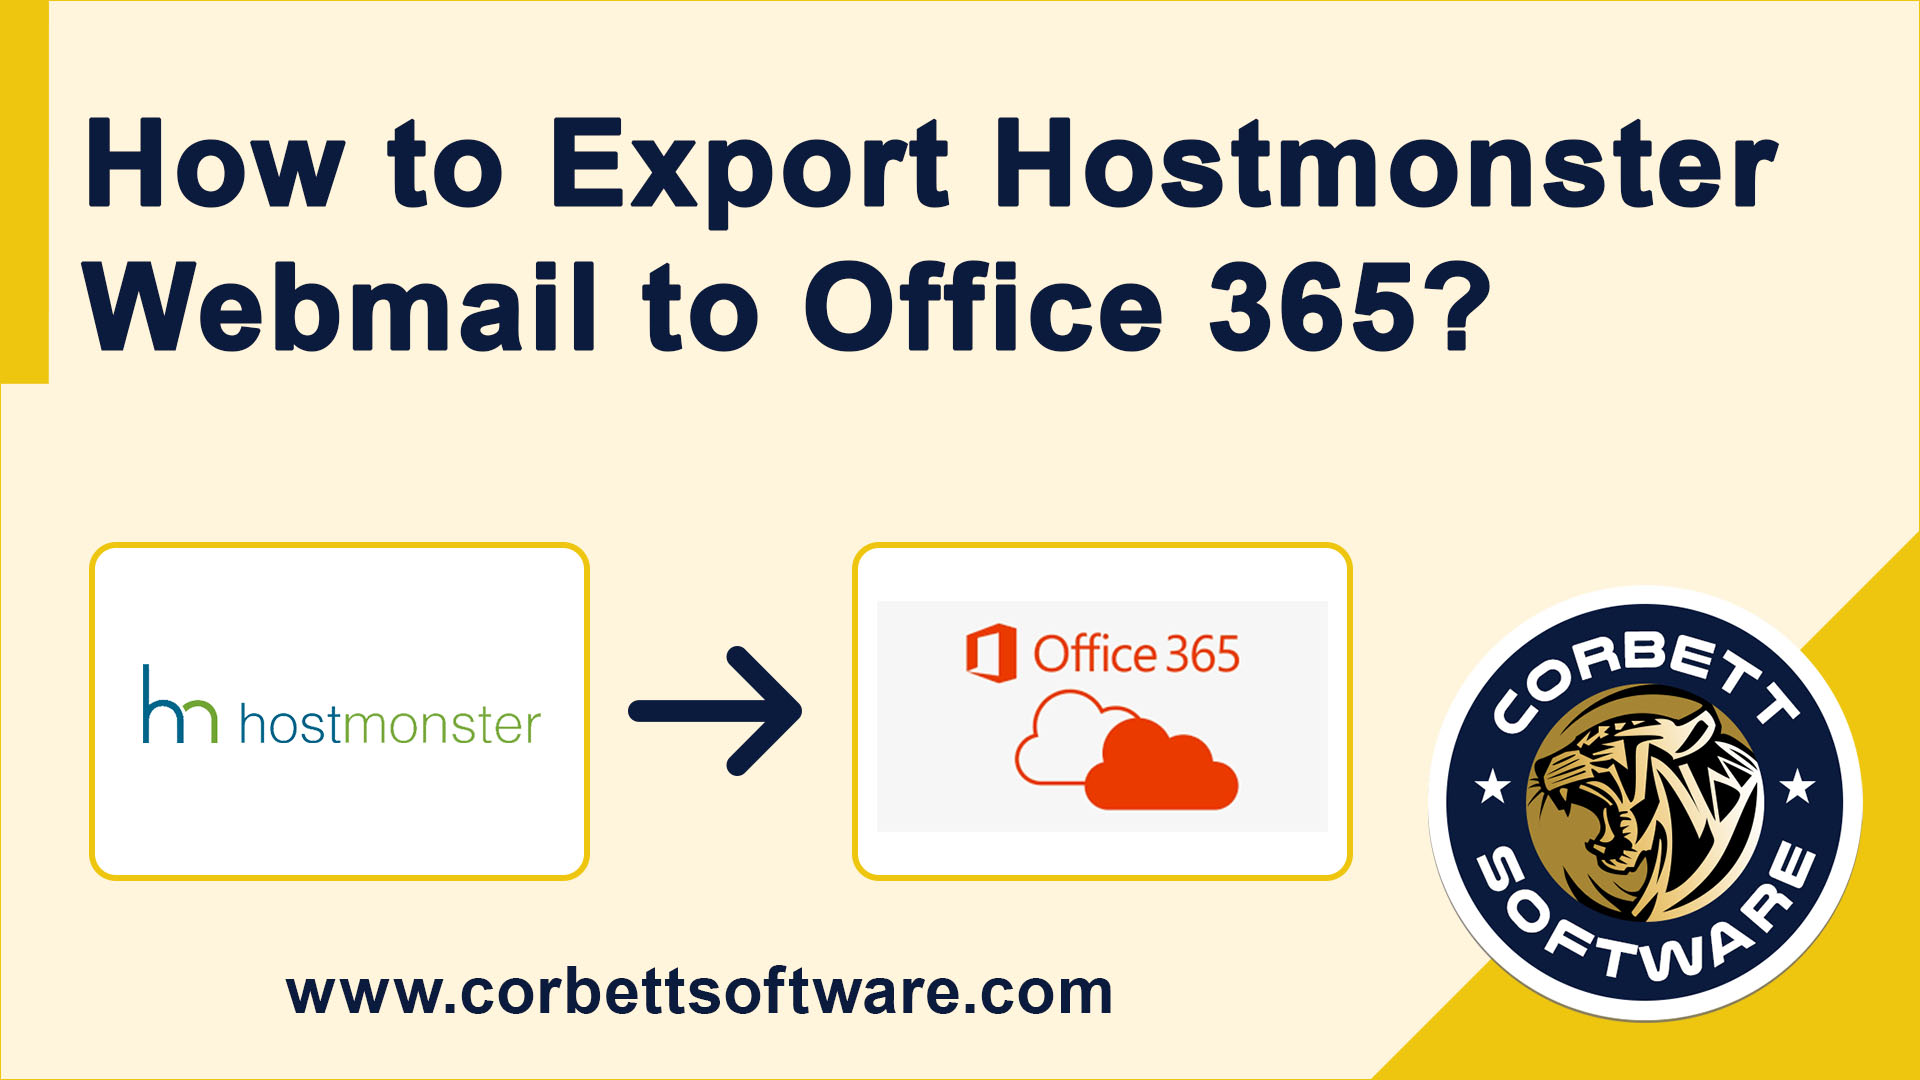 Export Hostmonster Webmail to Office 365